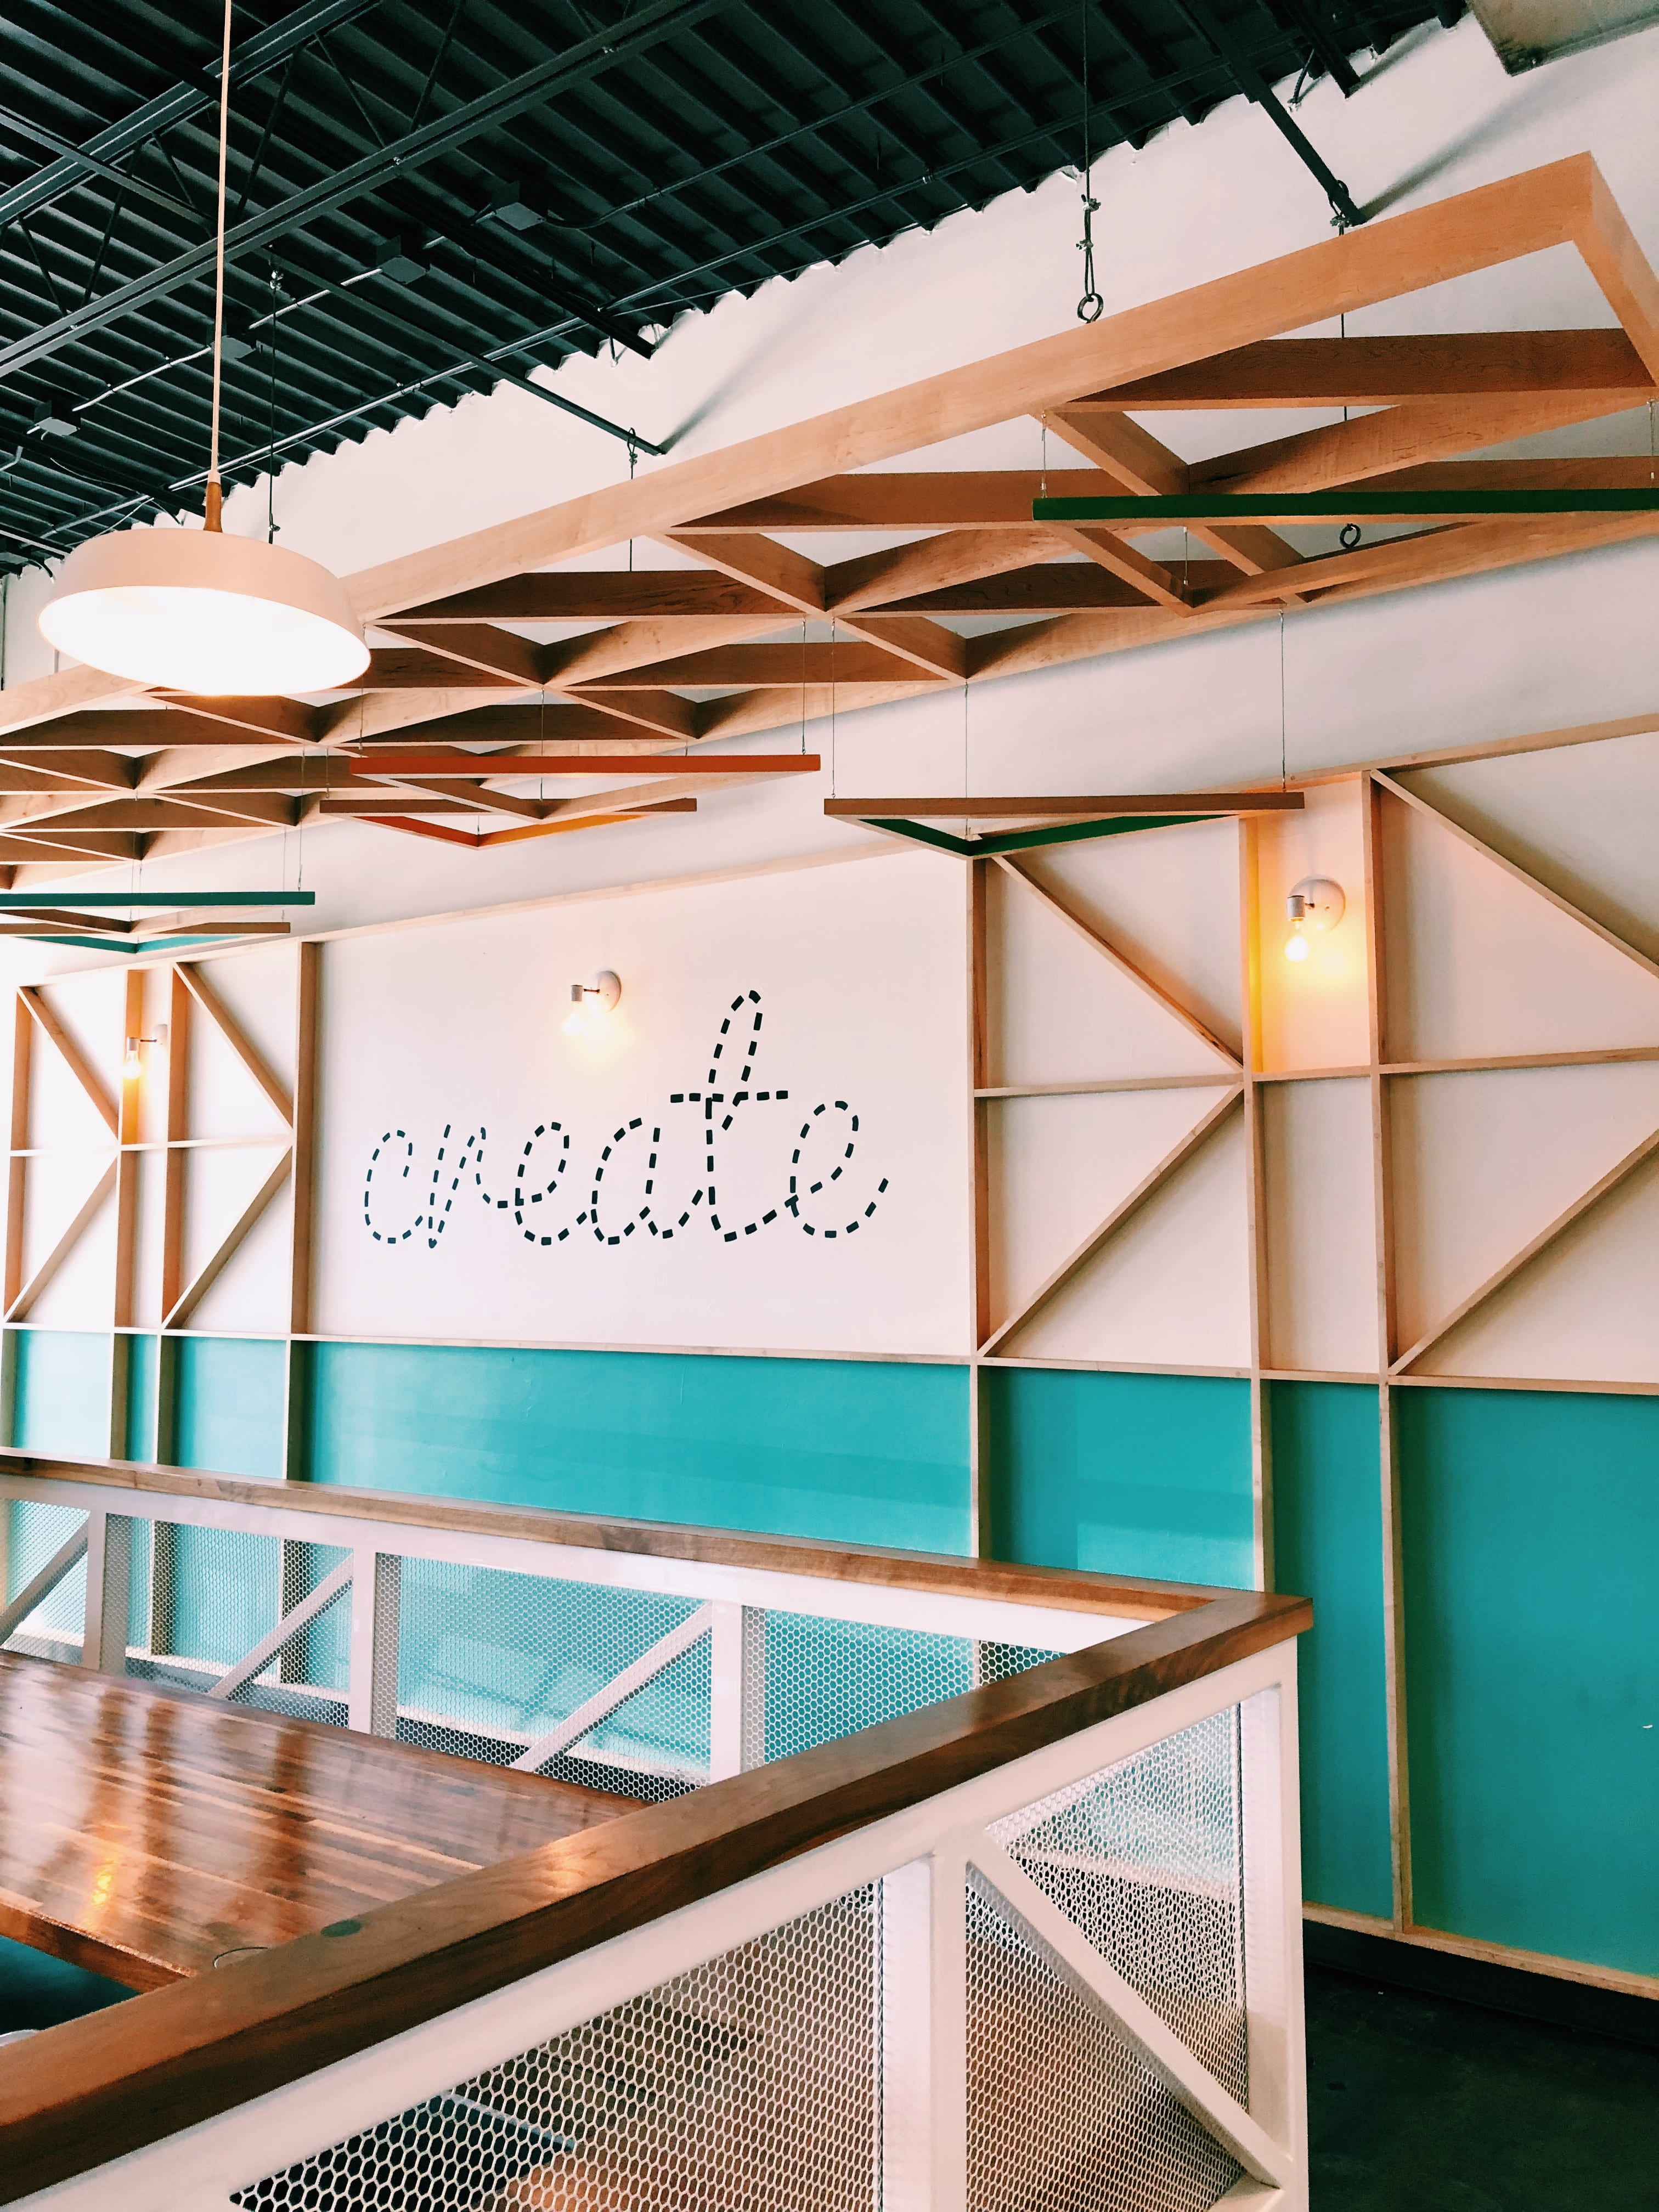 brown wooden wall with create decal, white and teal painted walls